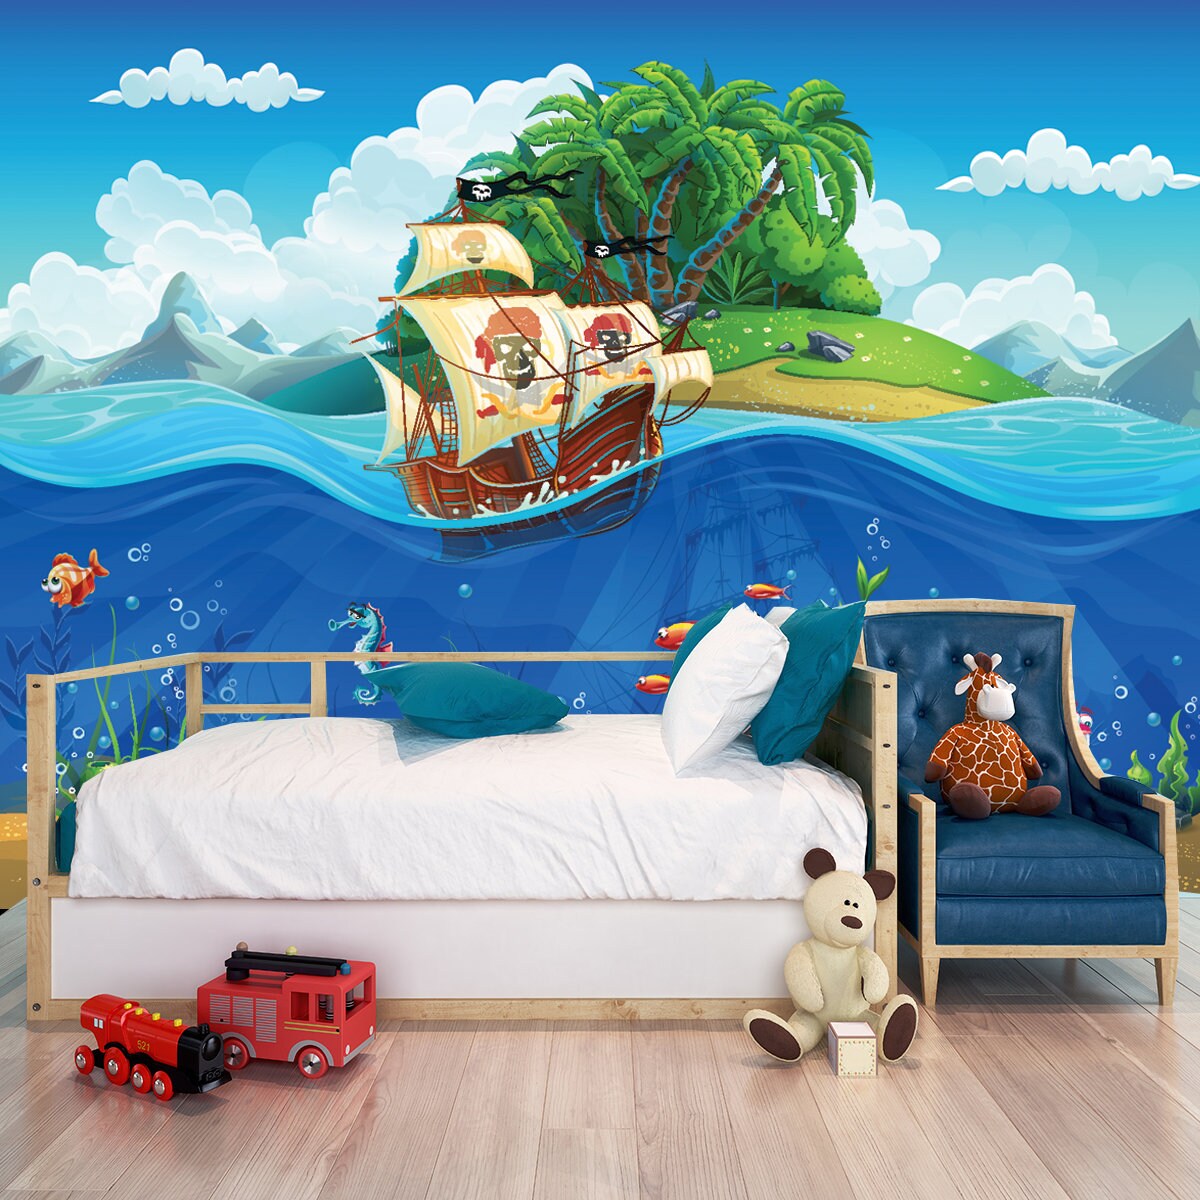 Cartoon Underwater World with Fish, Plants, Island and Ship Wallpaper Little Boys Room Mural